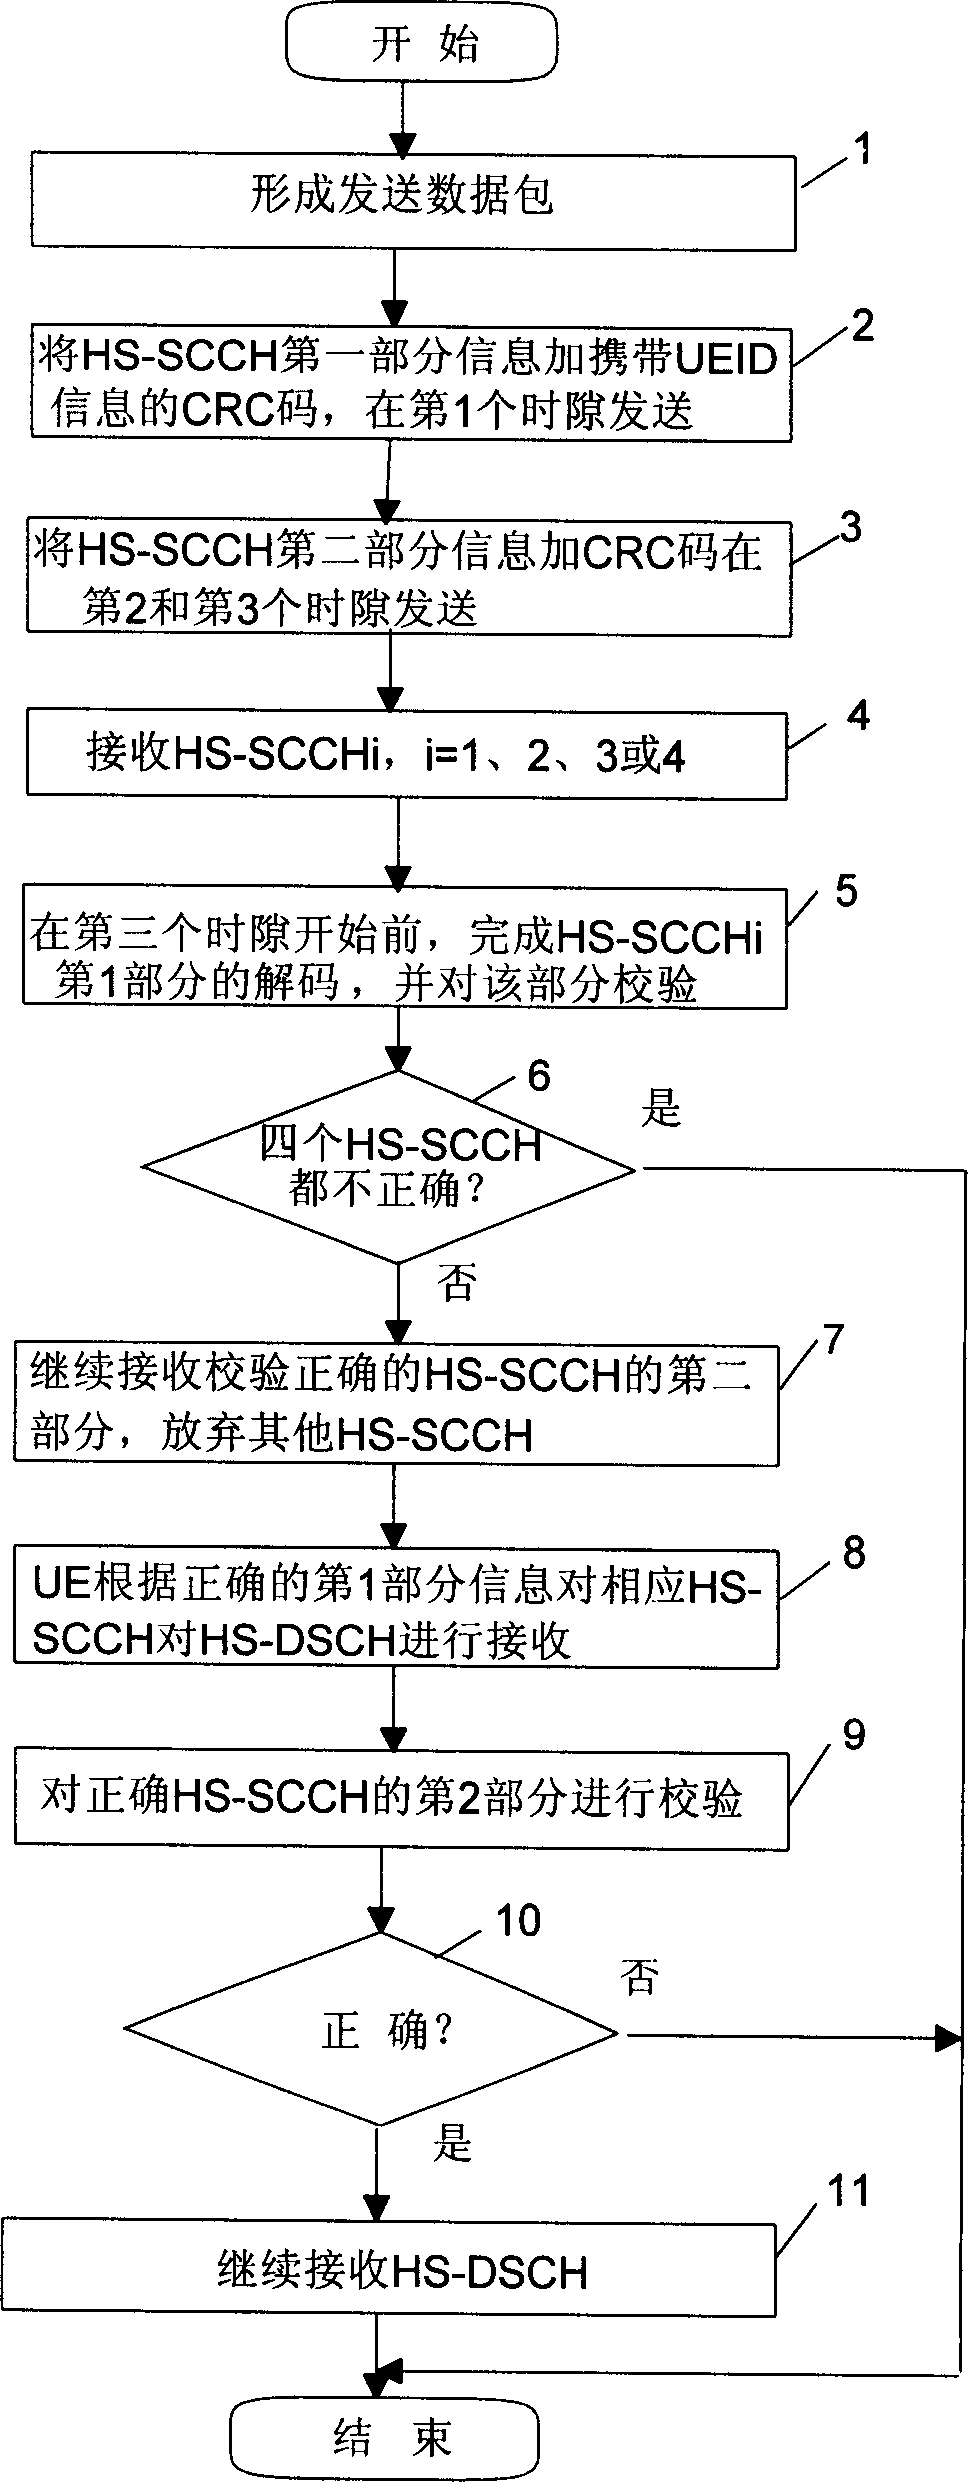 Data transmission control method of downgoing high speed shared channel in high speed data insertion system